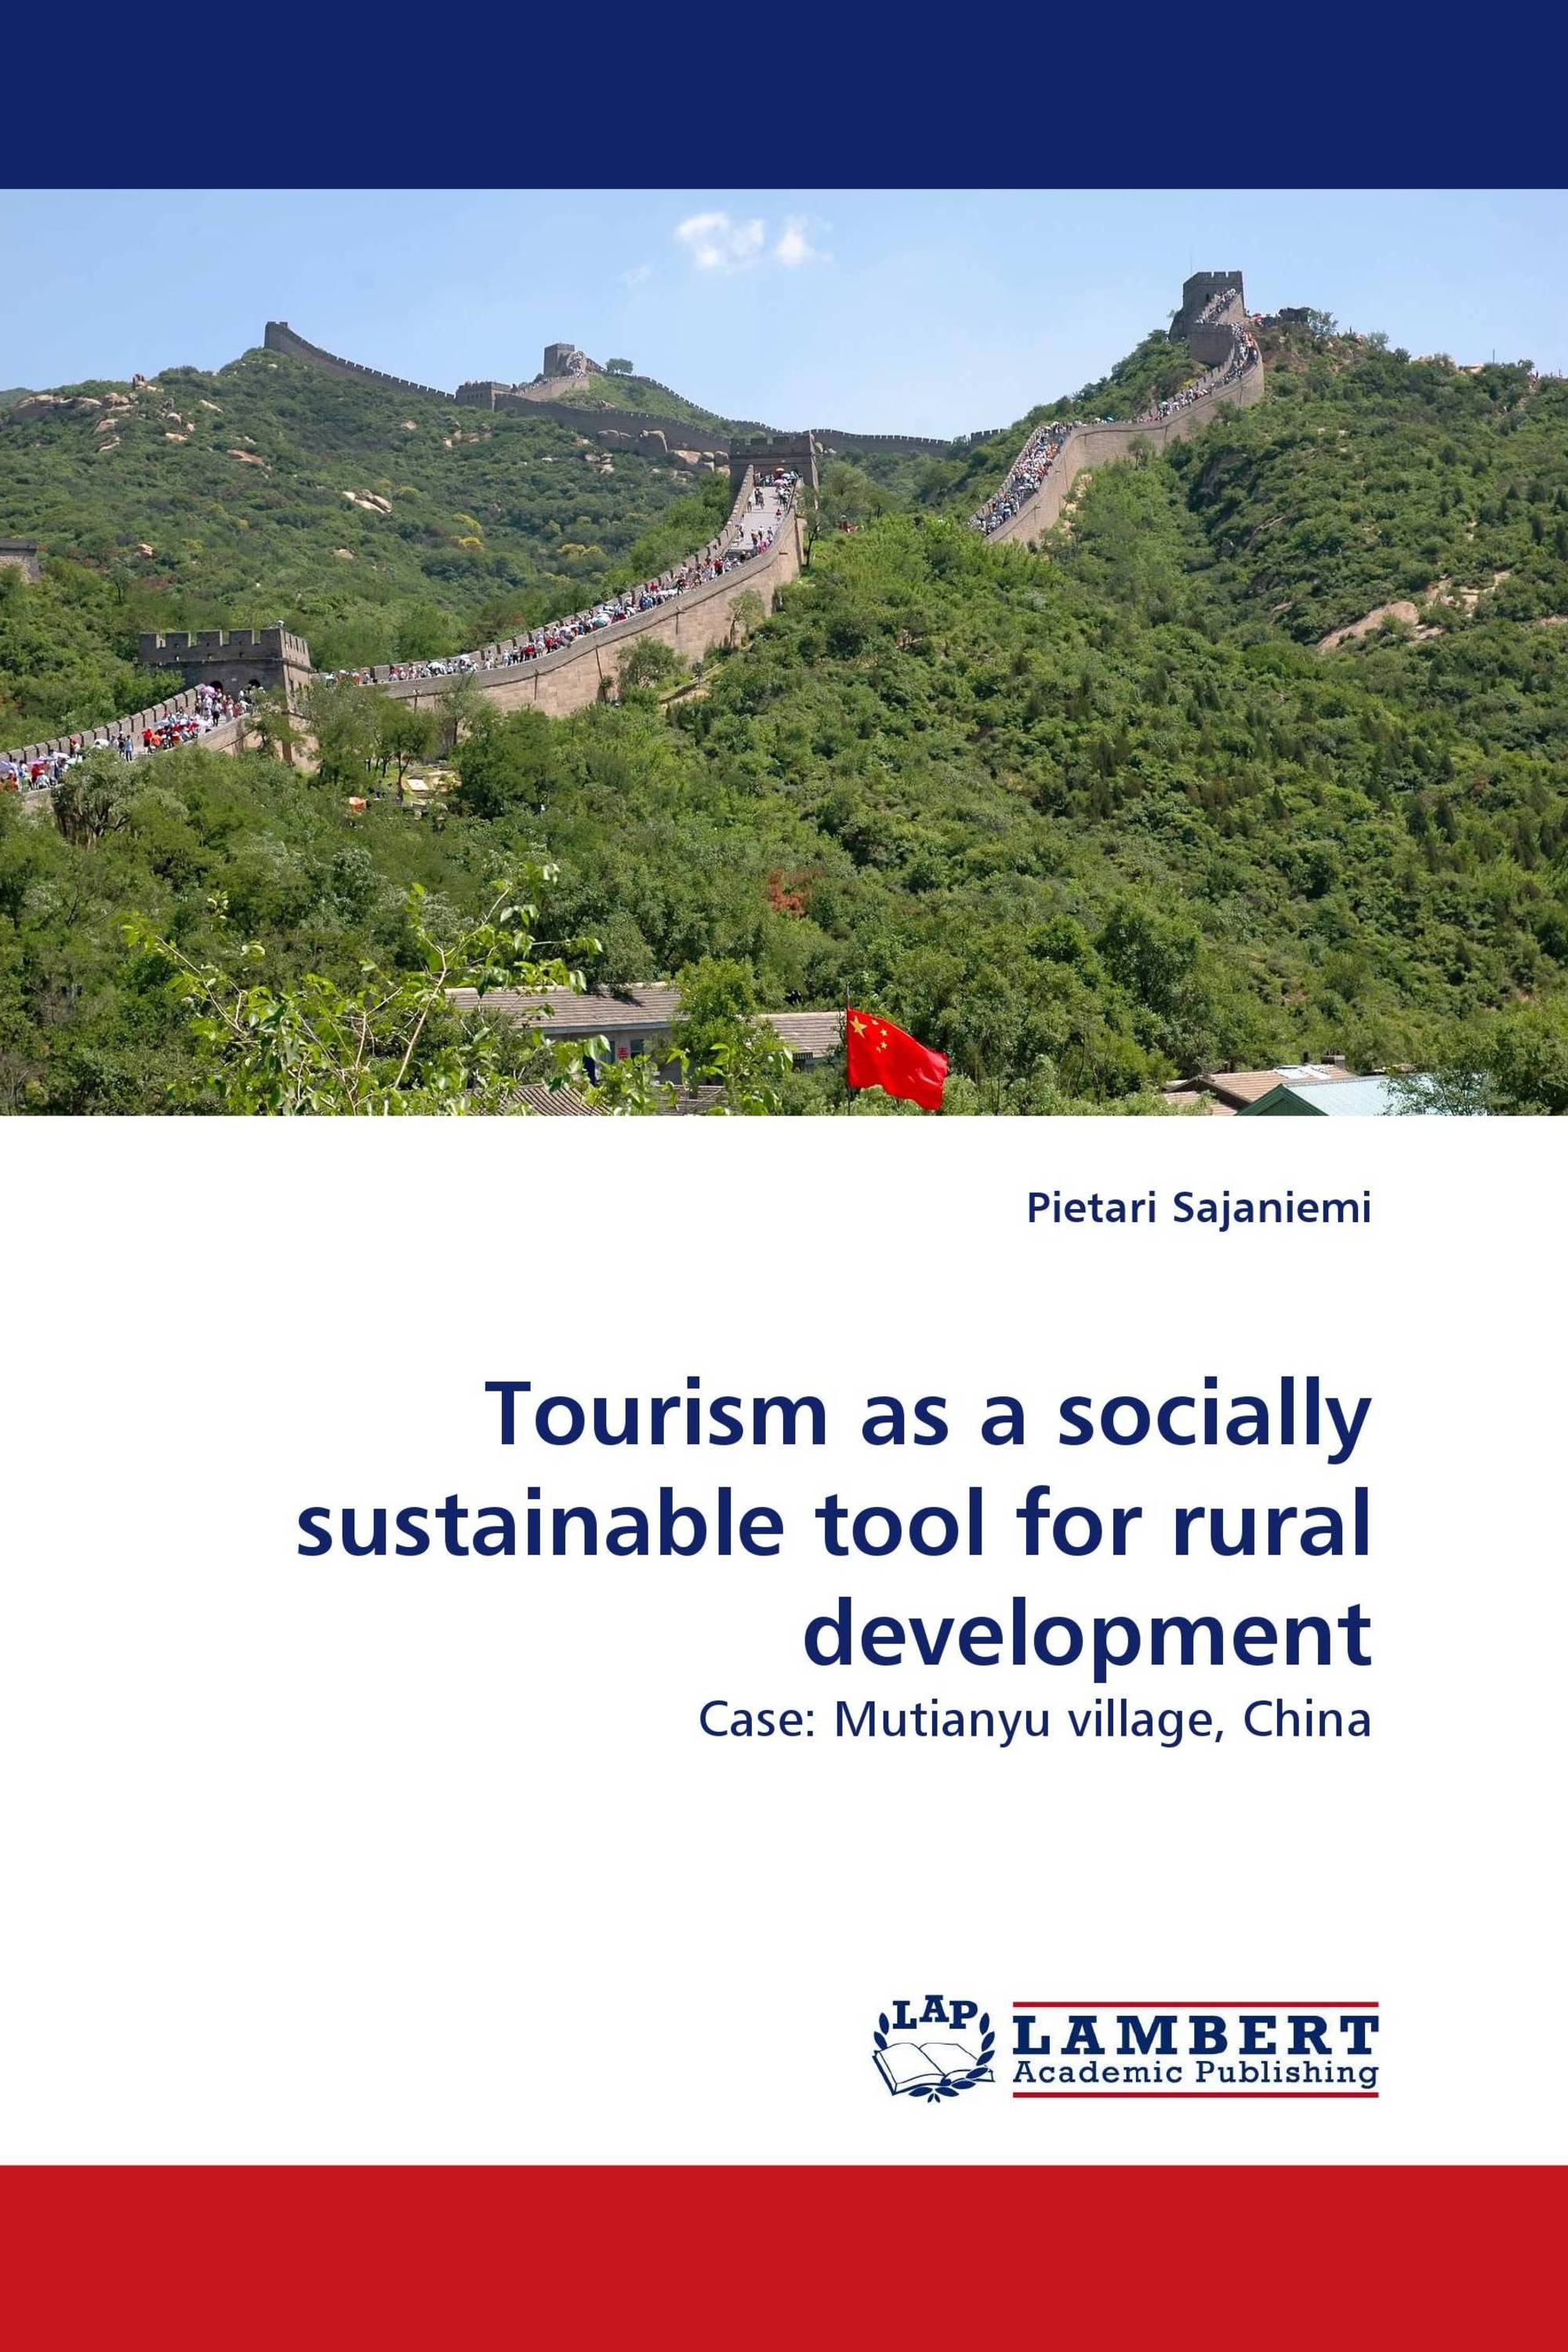 rural tourism social sustainability